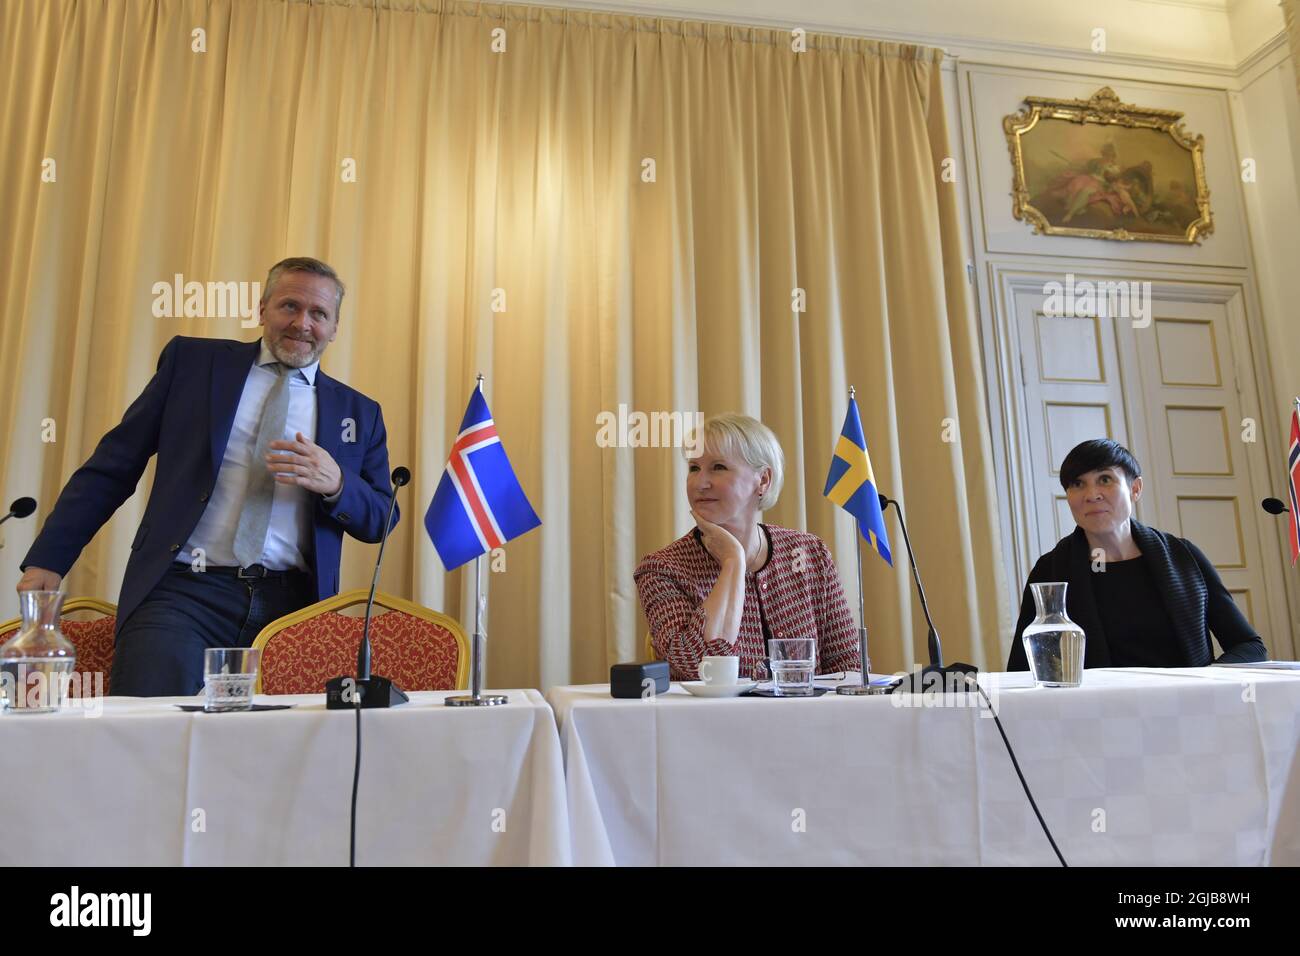 L-R : Anders Samuelsen, Foreign Minister of Denmark, Margot Wallstrom, Foreign Minister of Sweden and Ine Eriksen Soreide, Foreign Minister of Norway during a joint press conference which concludes the Nordic Foreign Minister meeting at Nasby Castle in Taby, Sweden April 18. 2018. Photo: Jessica Gow / TT / Kod 10070  Stock Photo